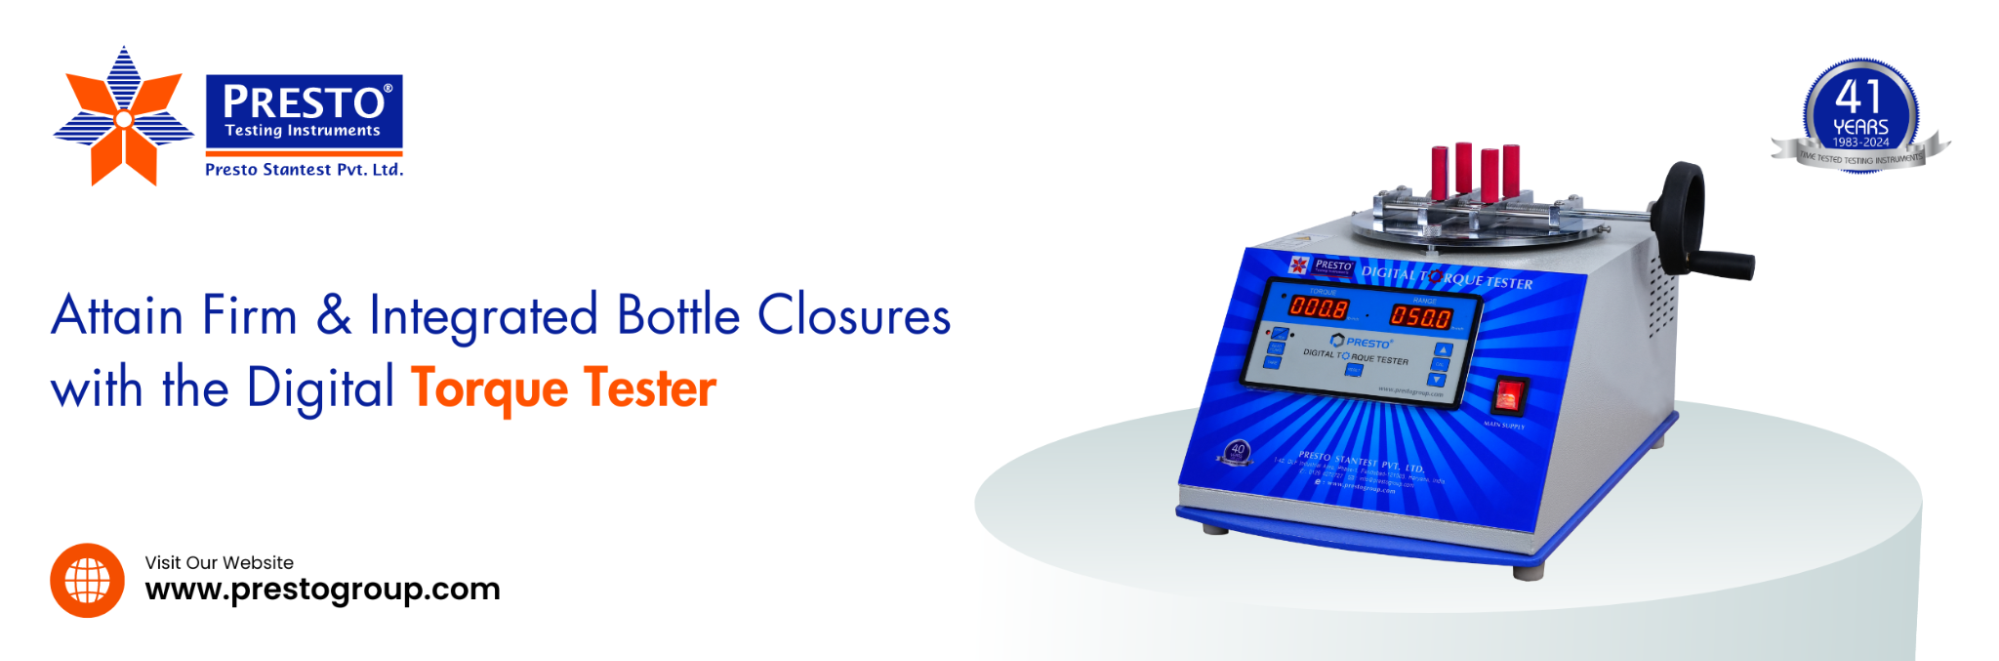 Attain Firm & Integrated Bottle Closures with the Digital Torque Tester